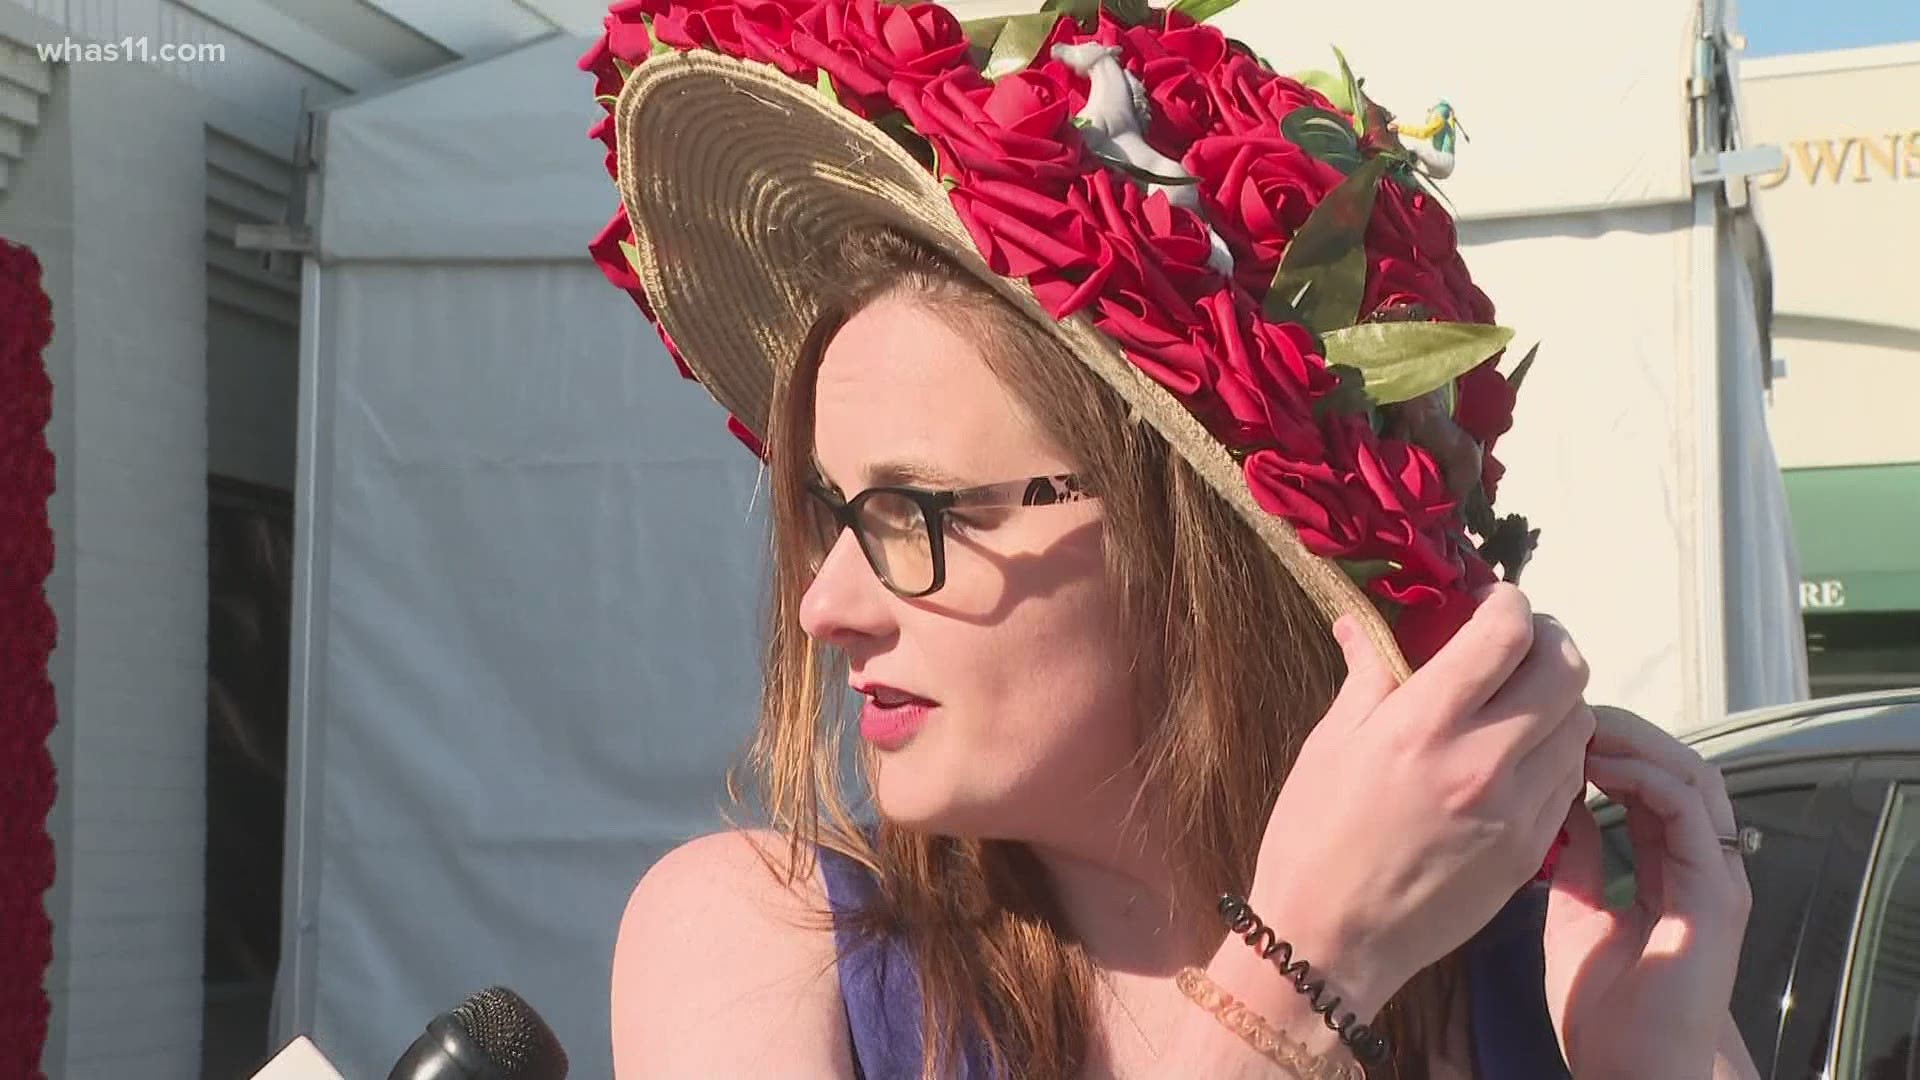 A Kentucky Derby isn't a Kentucky Derby without a bit of clothing creativity. Some fans went big with bets but others, big on fashion.